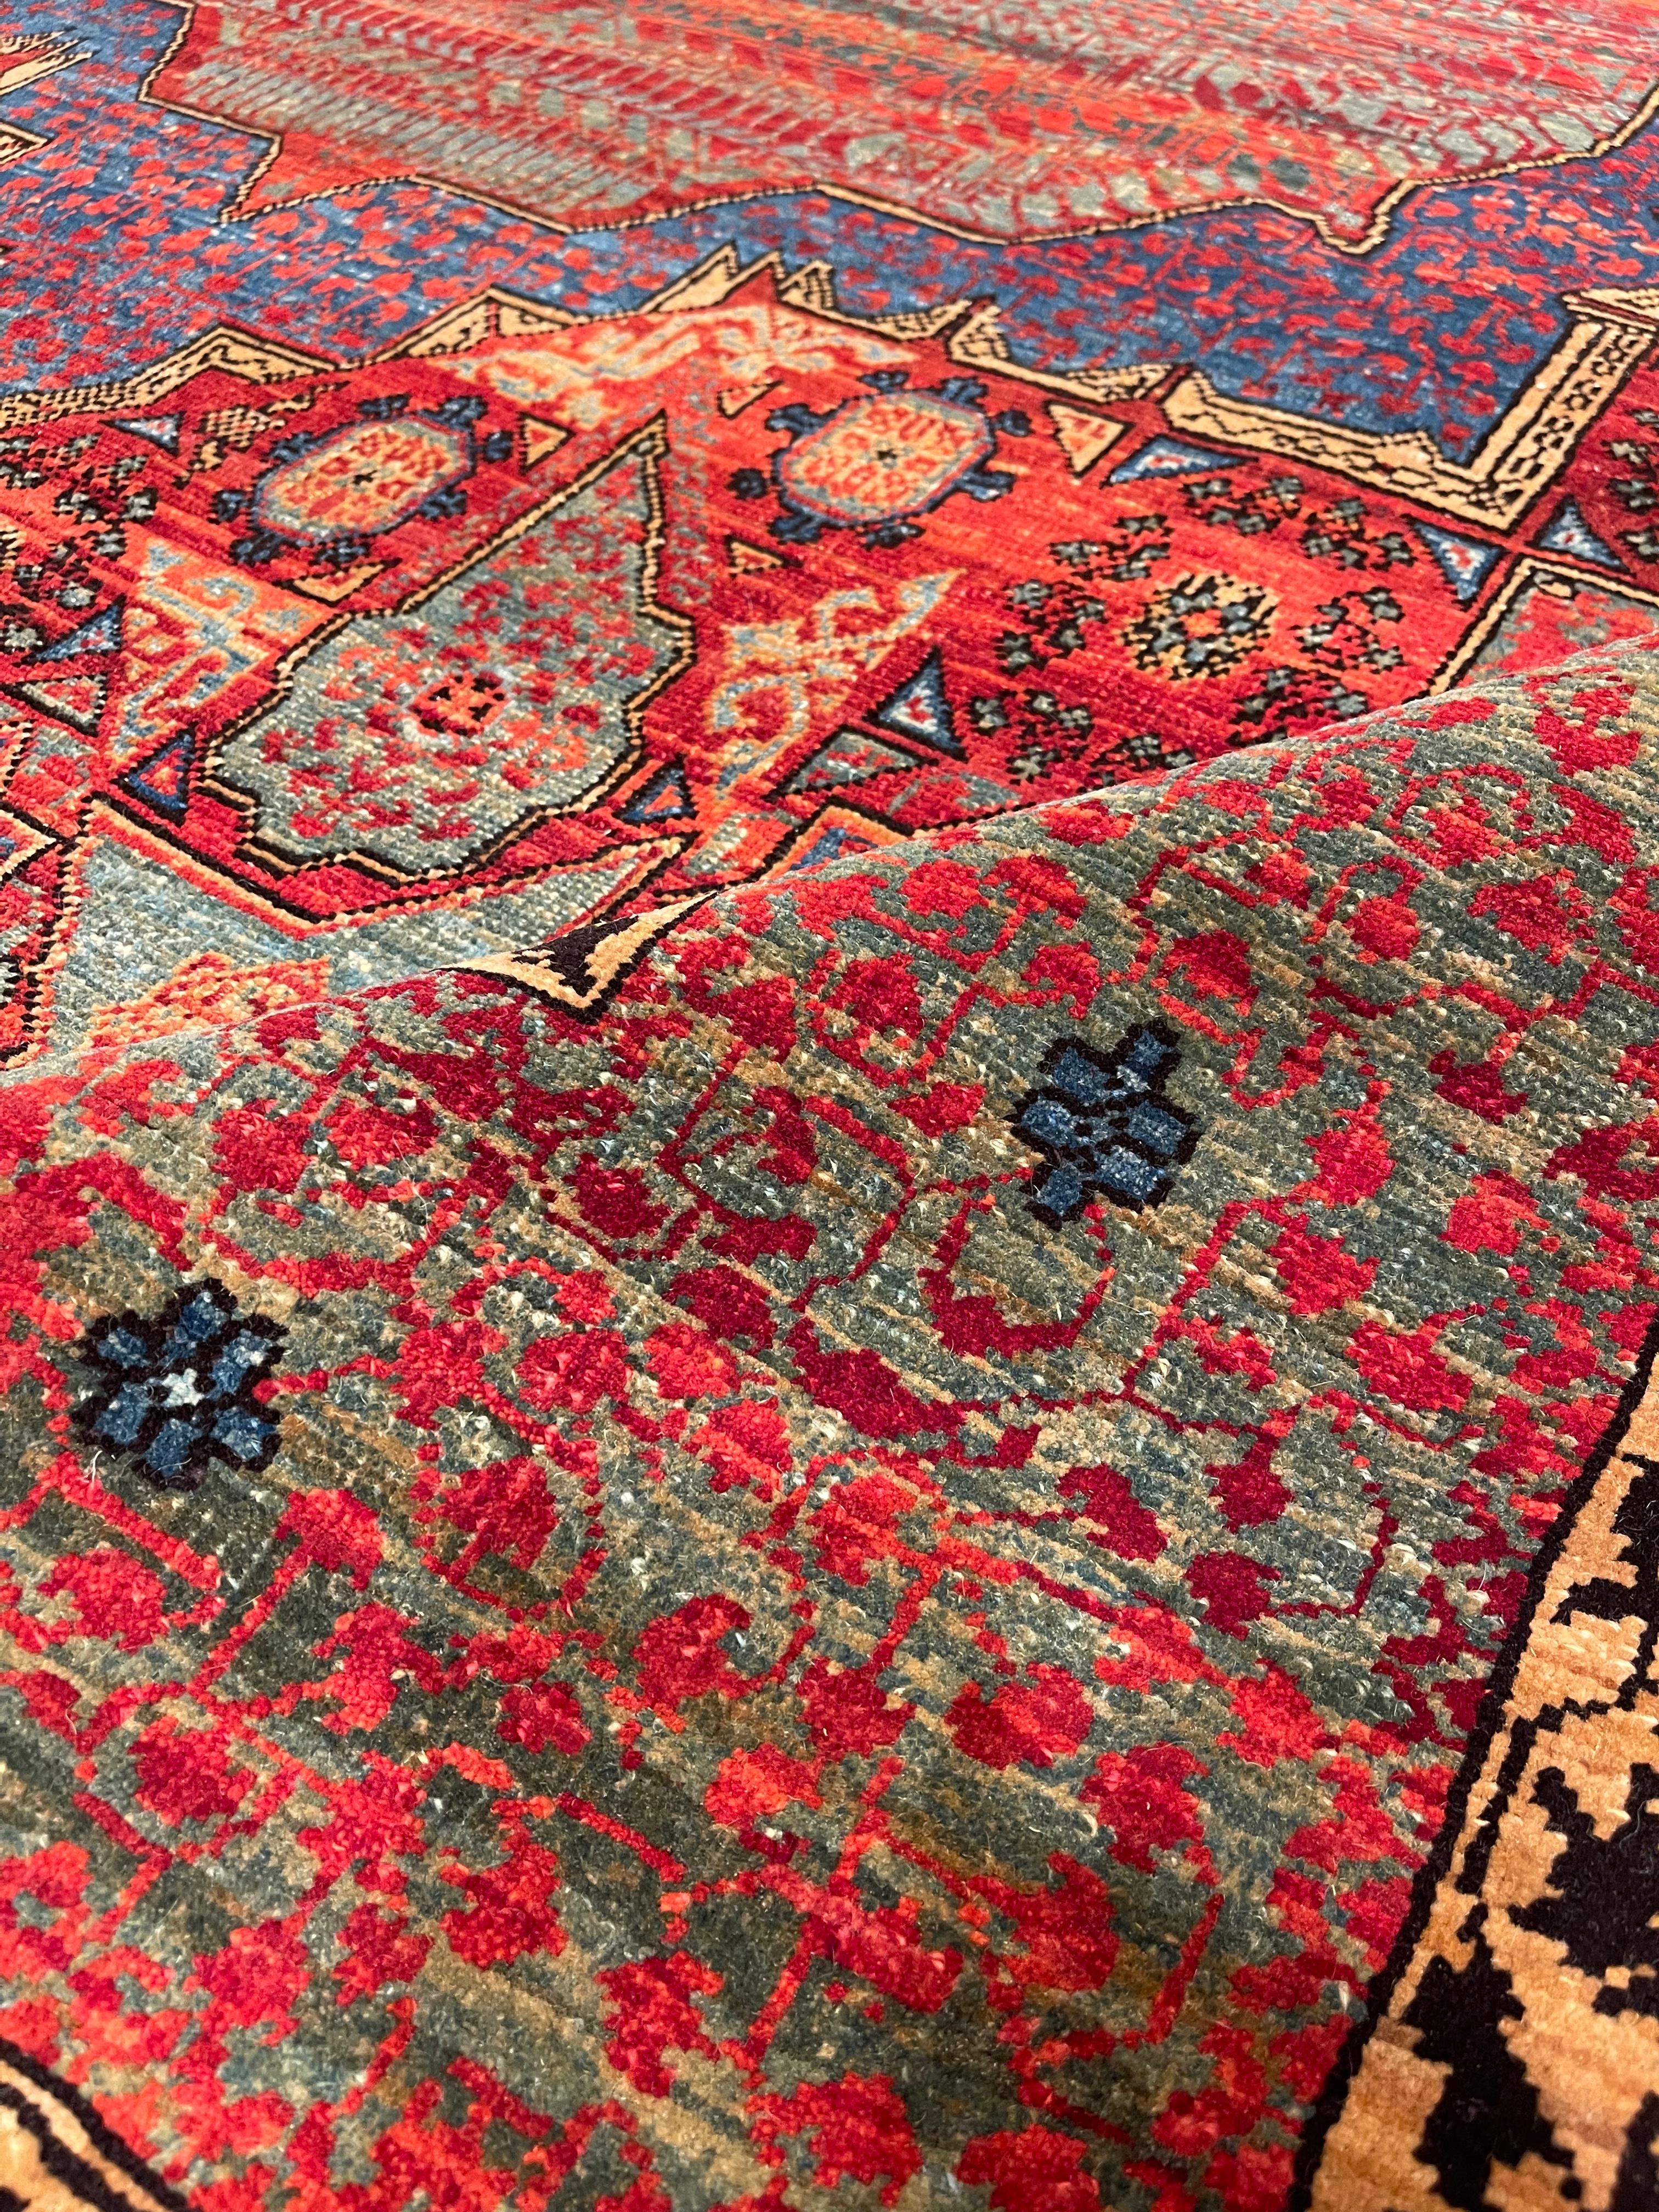 Wool Ararat Rugs Mamluk Carpet with Central Star 16th Century Revival, Natural Dyed For Sale